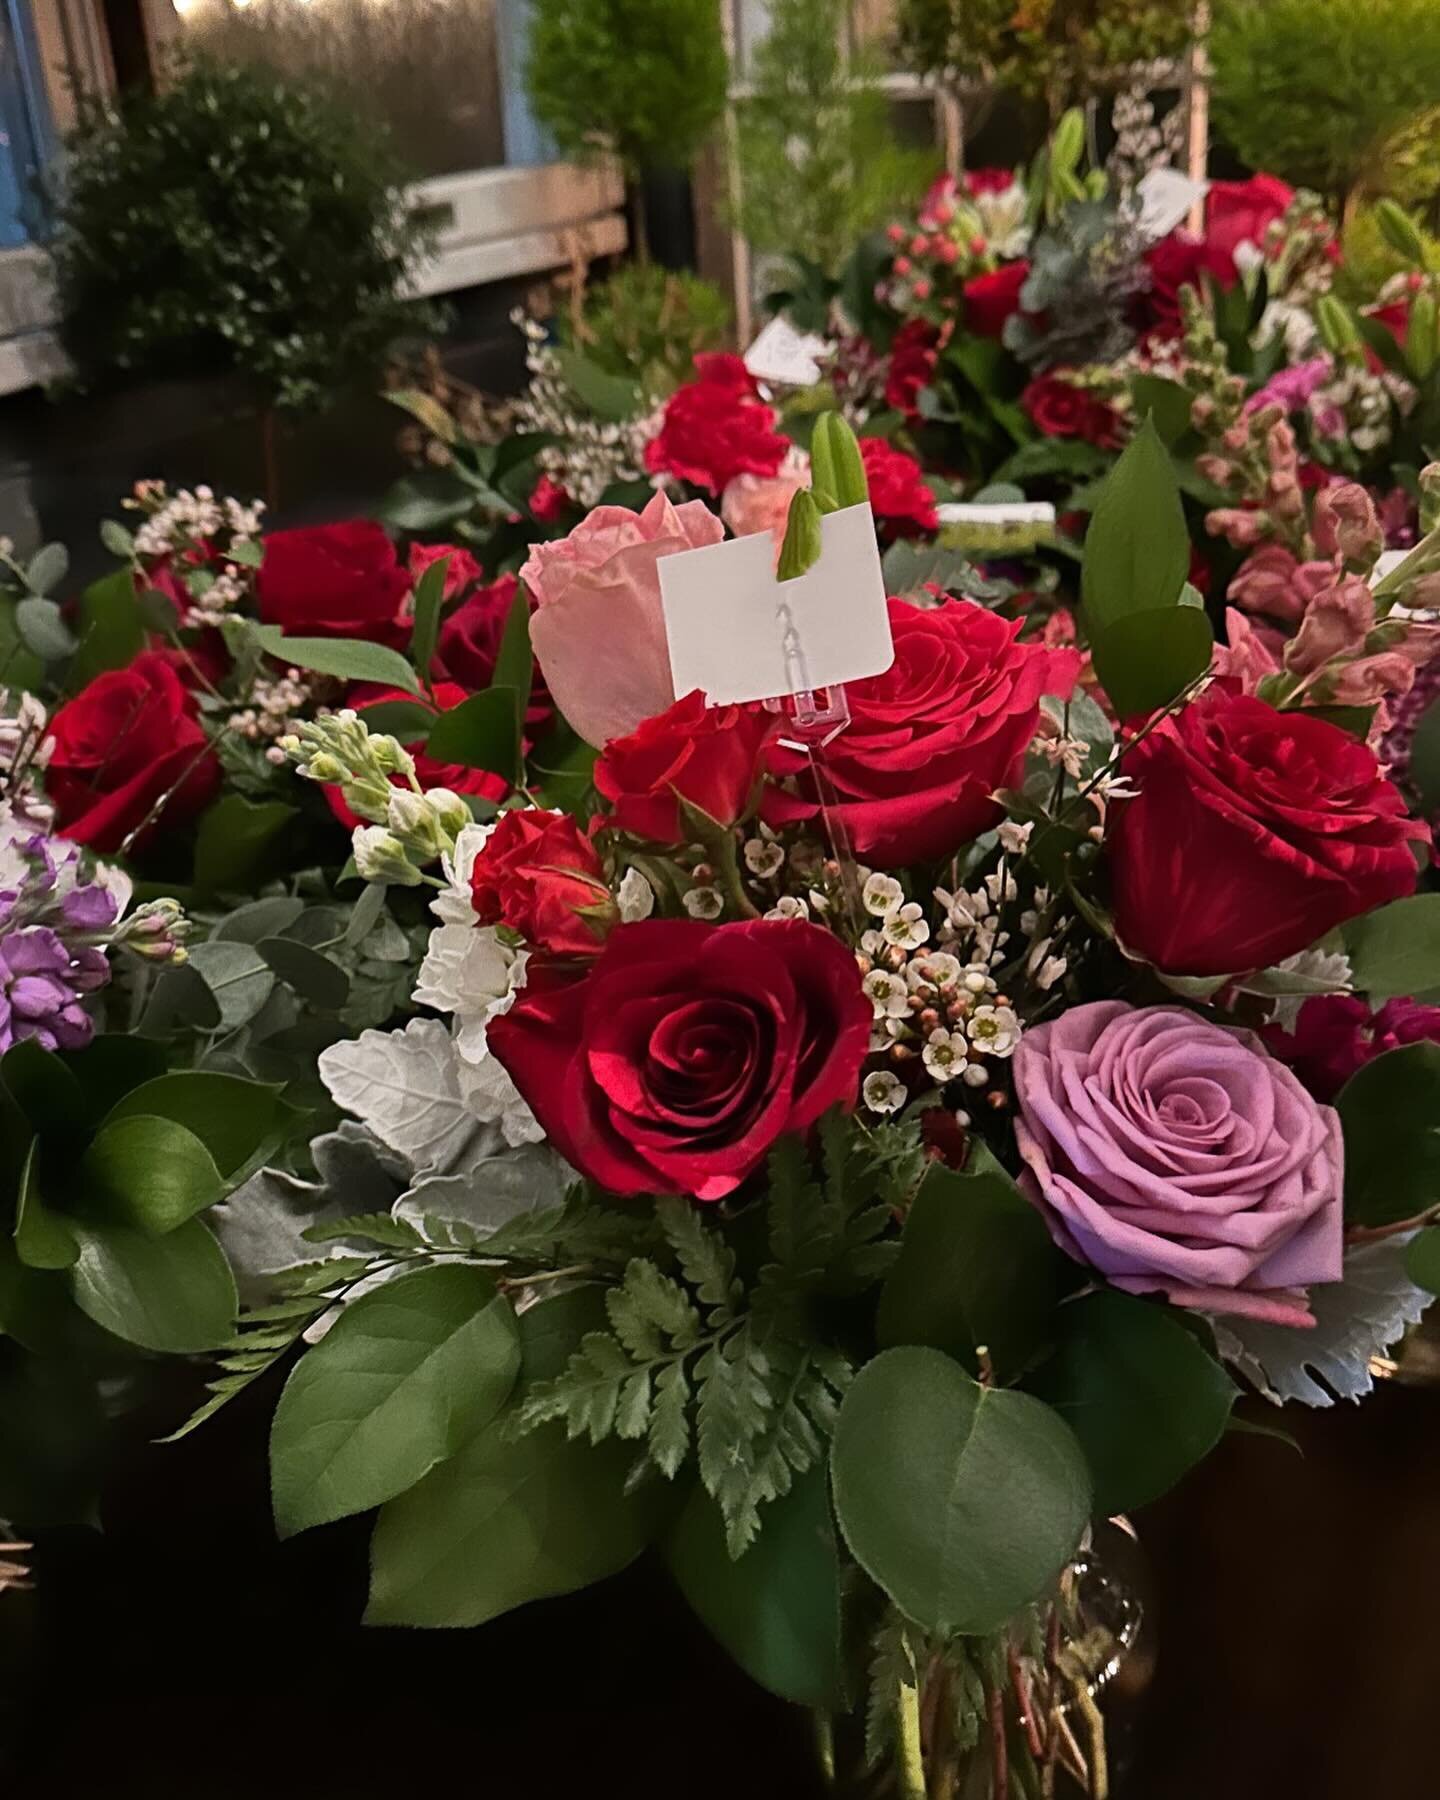 Thank you to our wonderful community! This year&rsquo;s Valentines Day was so busy! I am honored with your support of my small business! The market flower stand sold completely out - we restocked a number of times, and kept making flowers on demand f